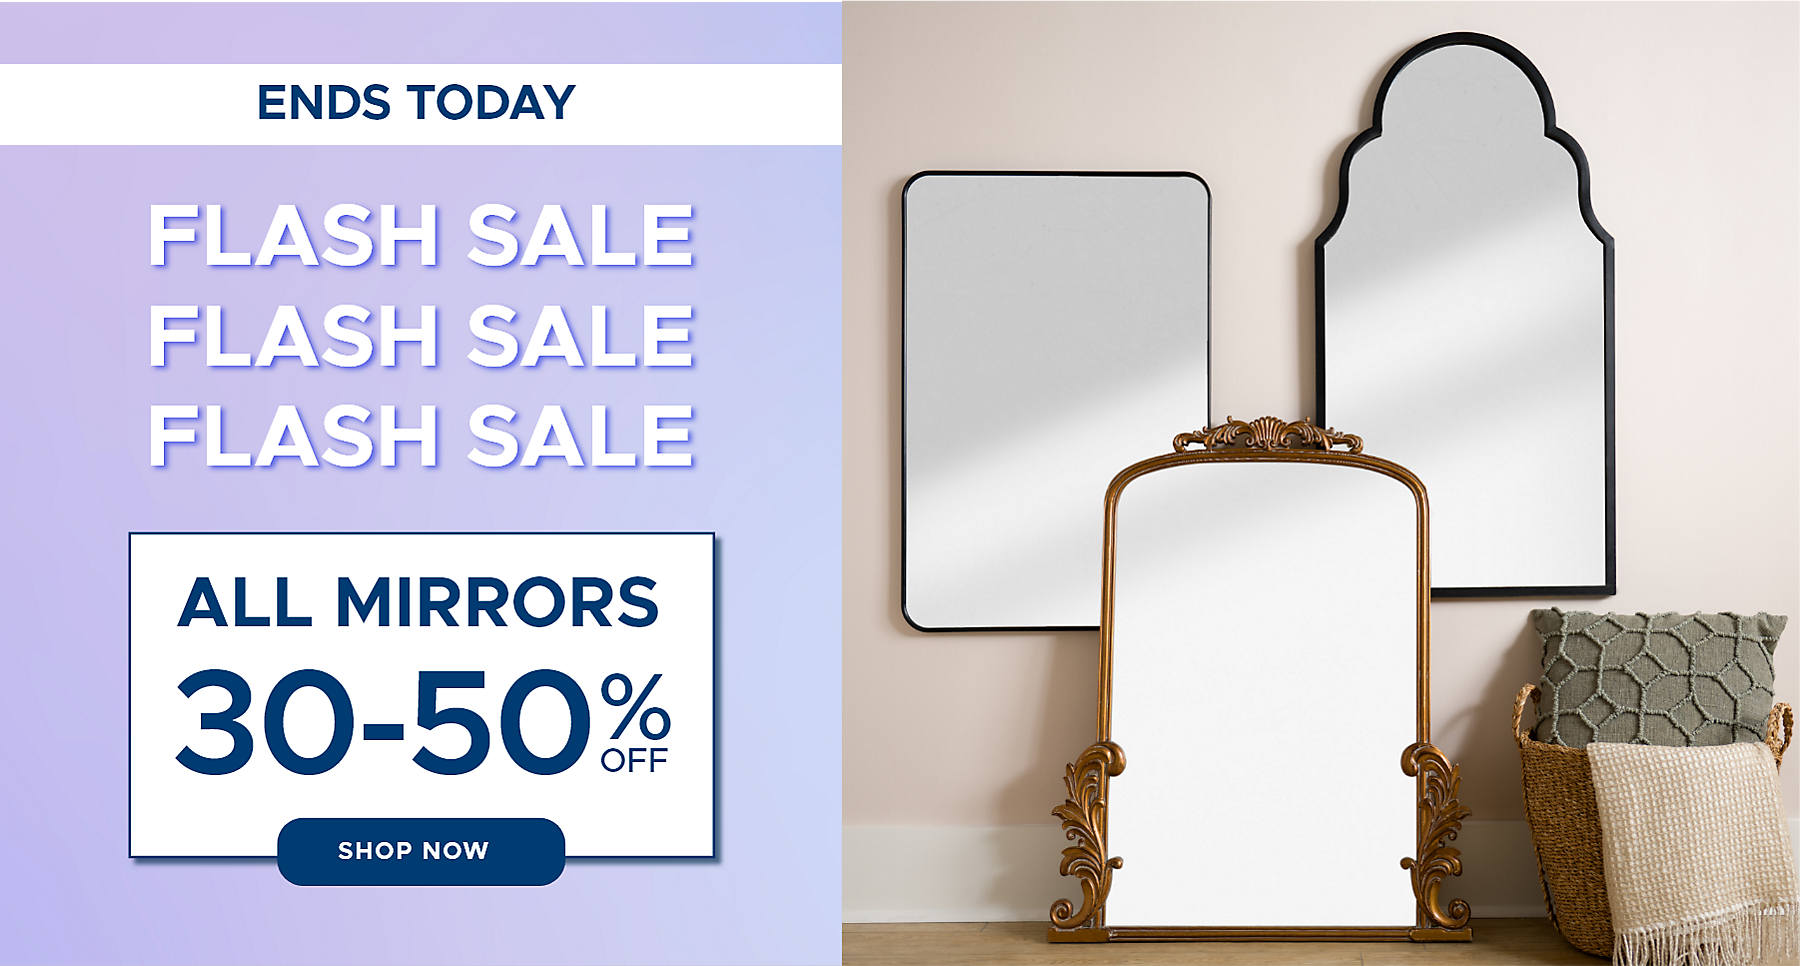 Ends Today Flash Sale All Mirrors 30-50% off shop now